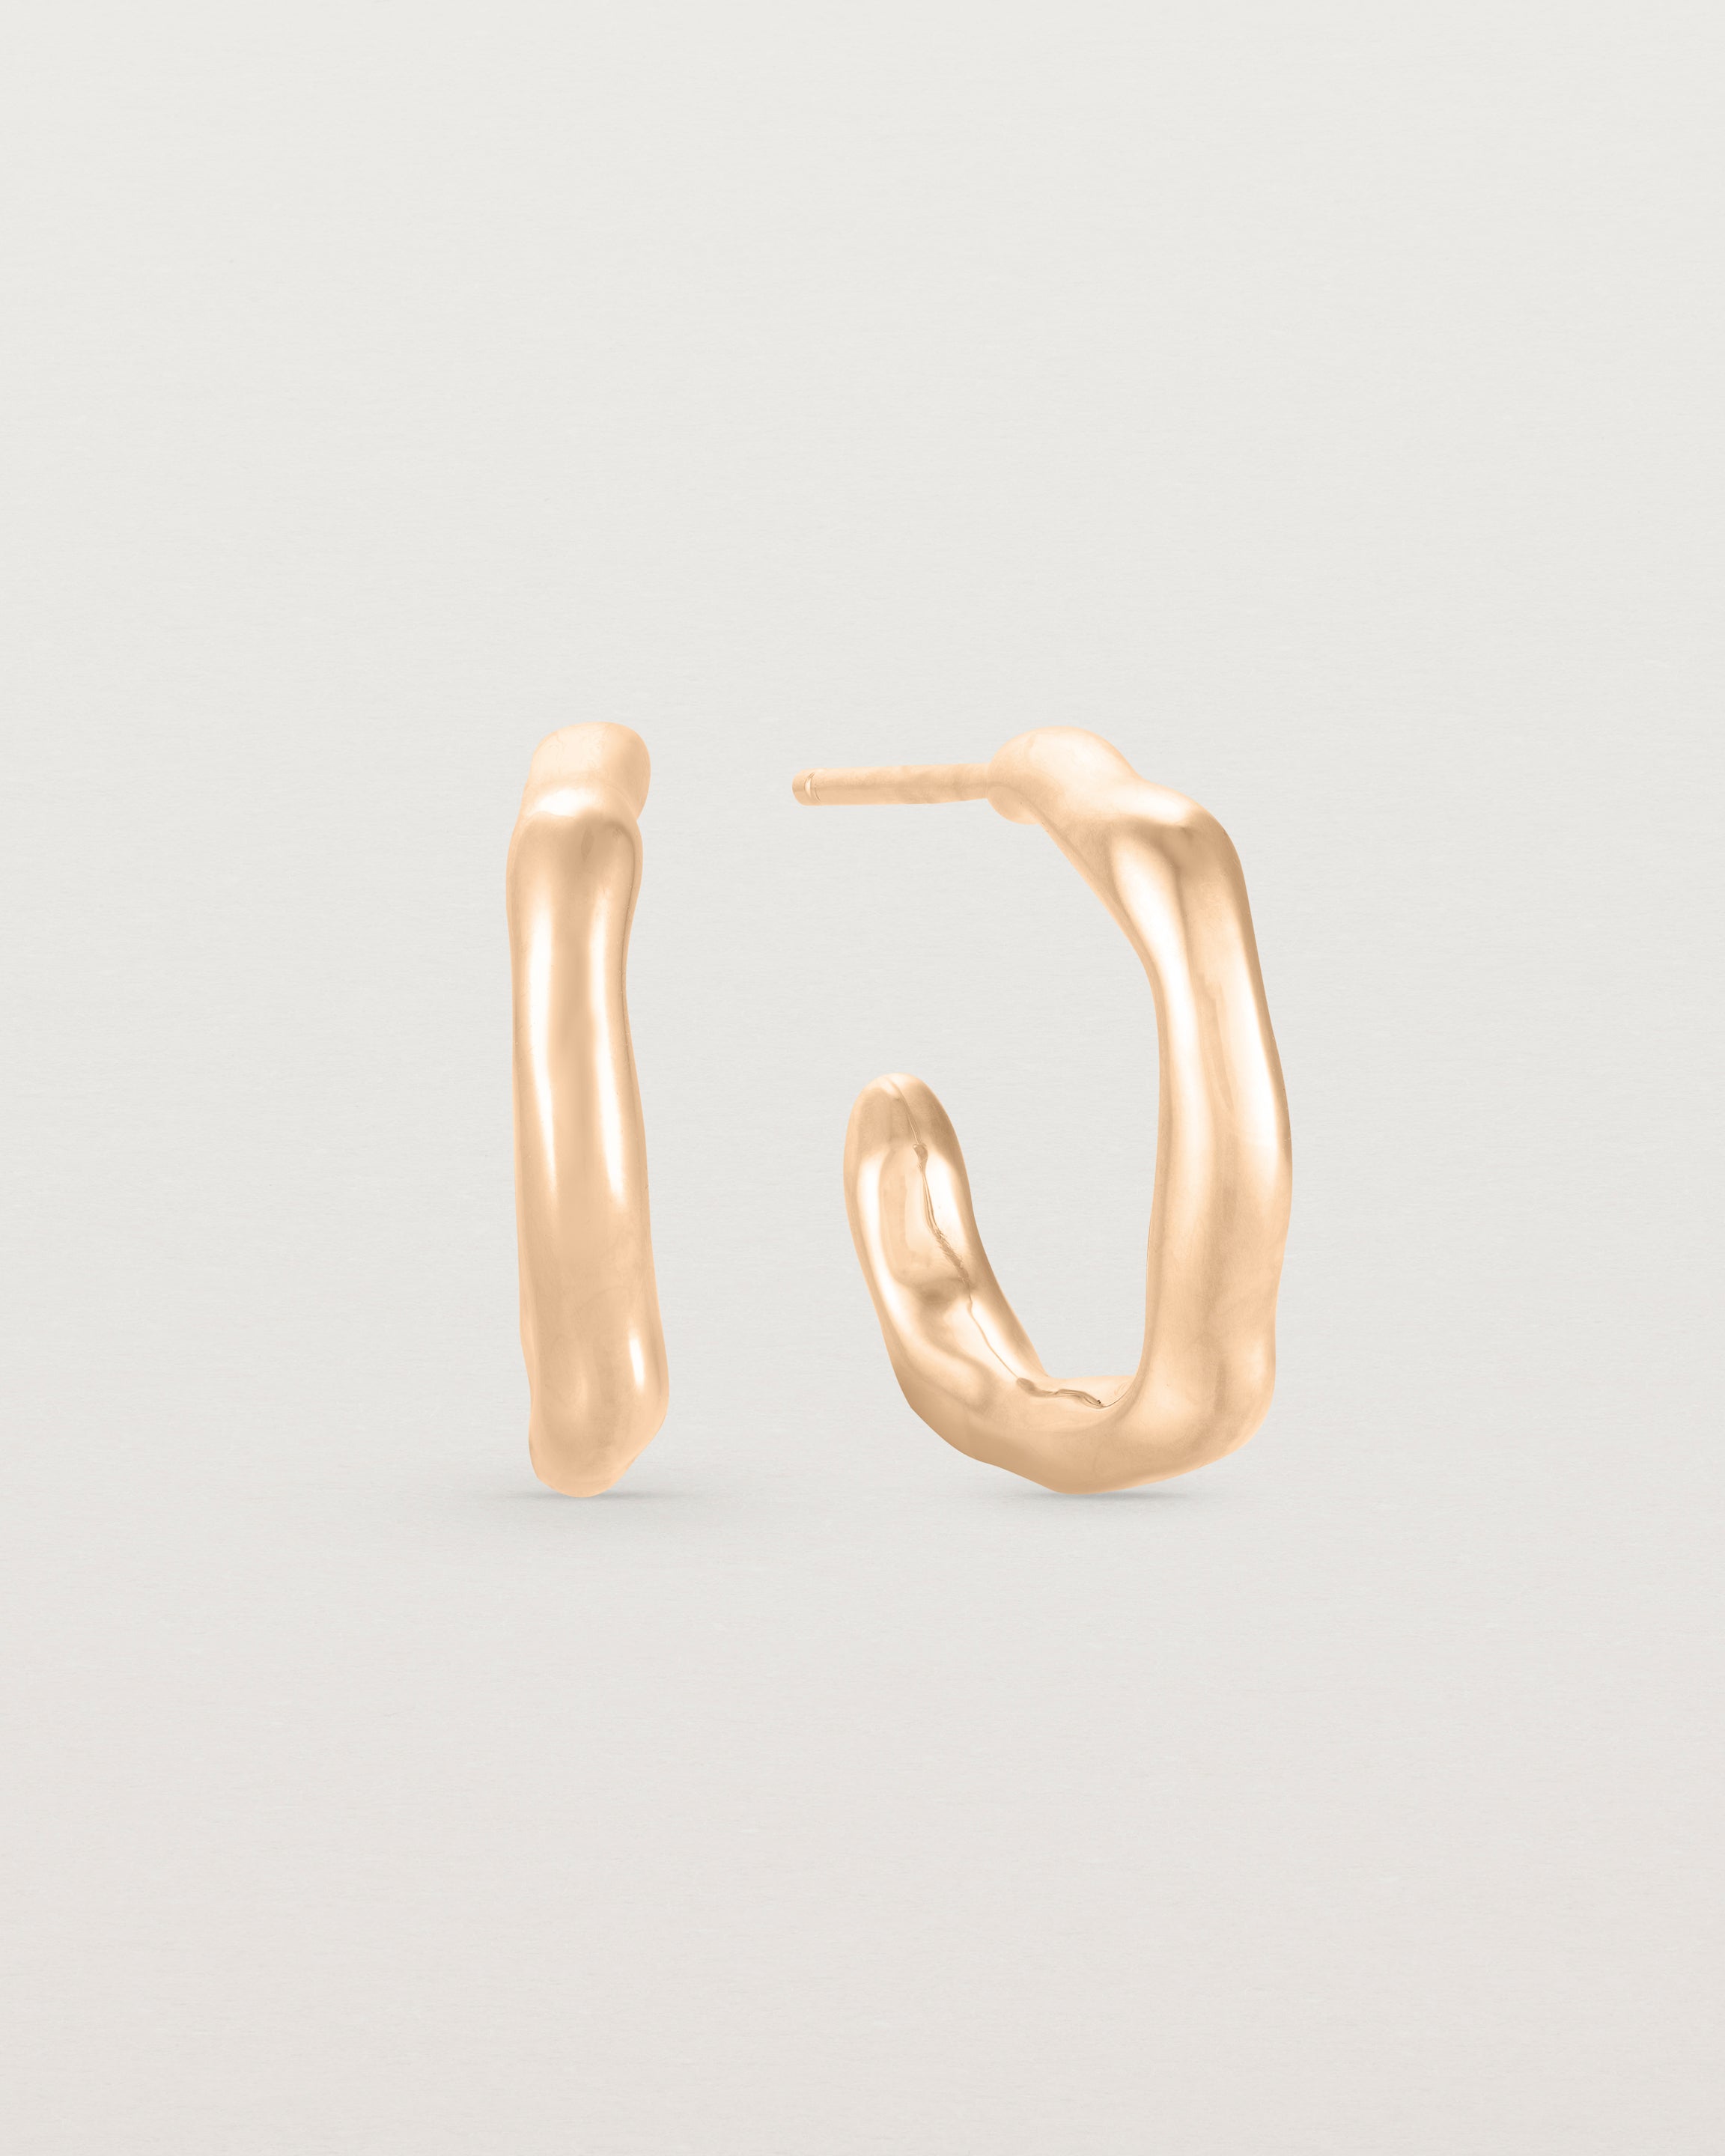 A pair of Organic Hoops | Rose Gold.